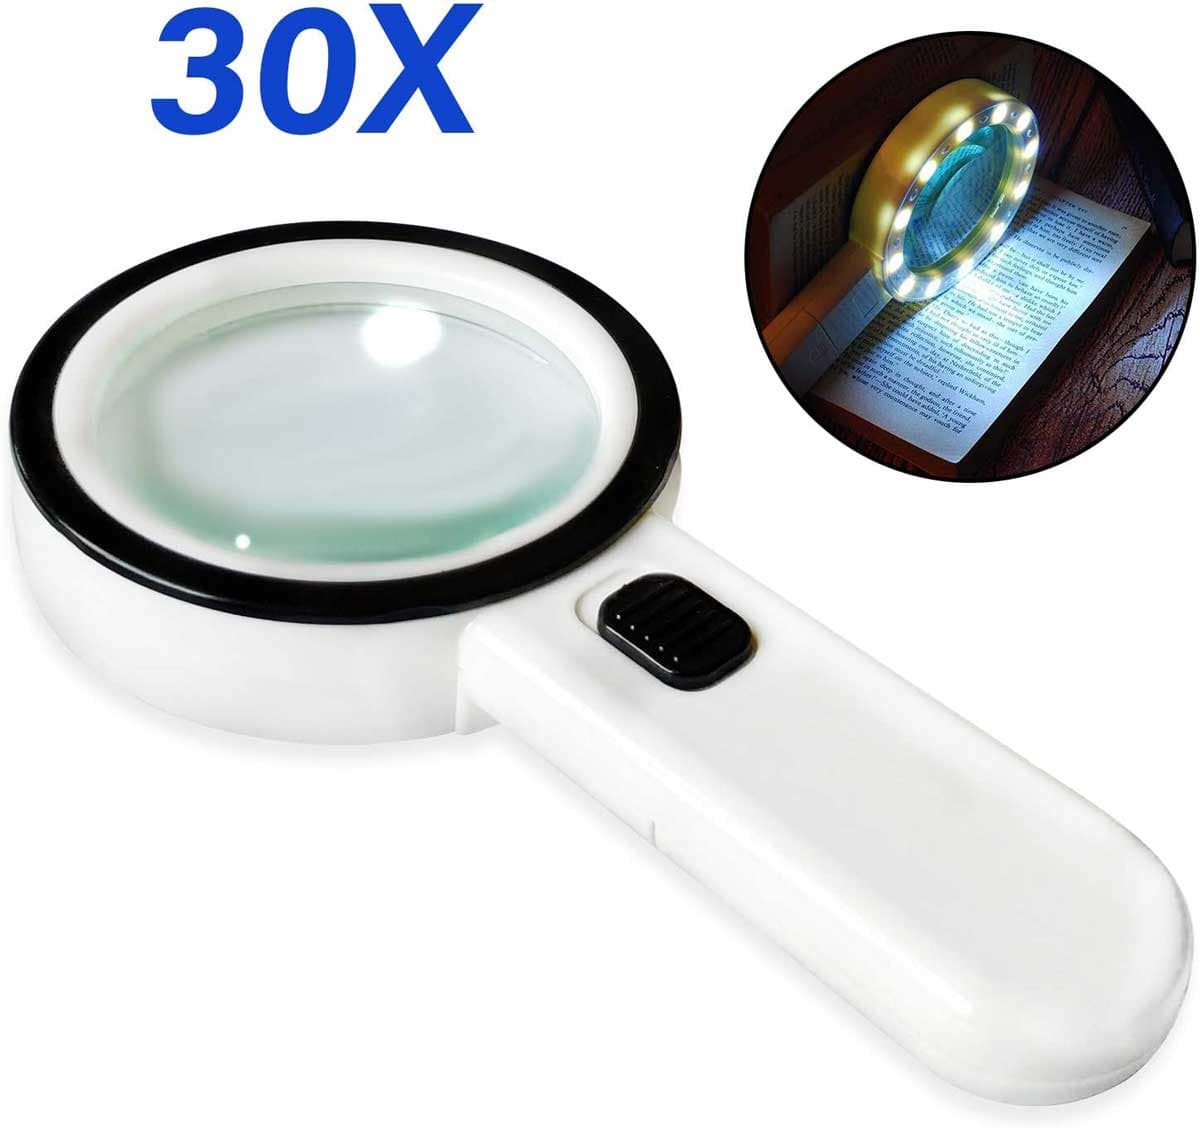 Jewelers loupe, In offer price with free shipping